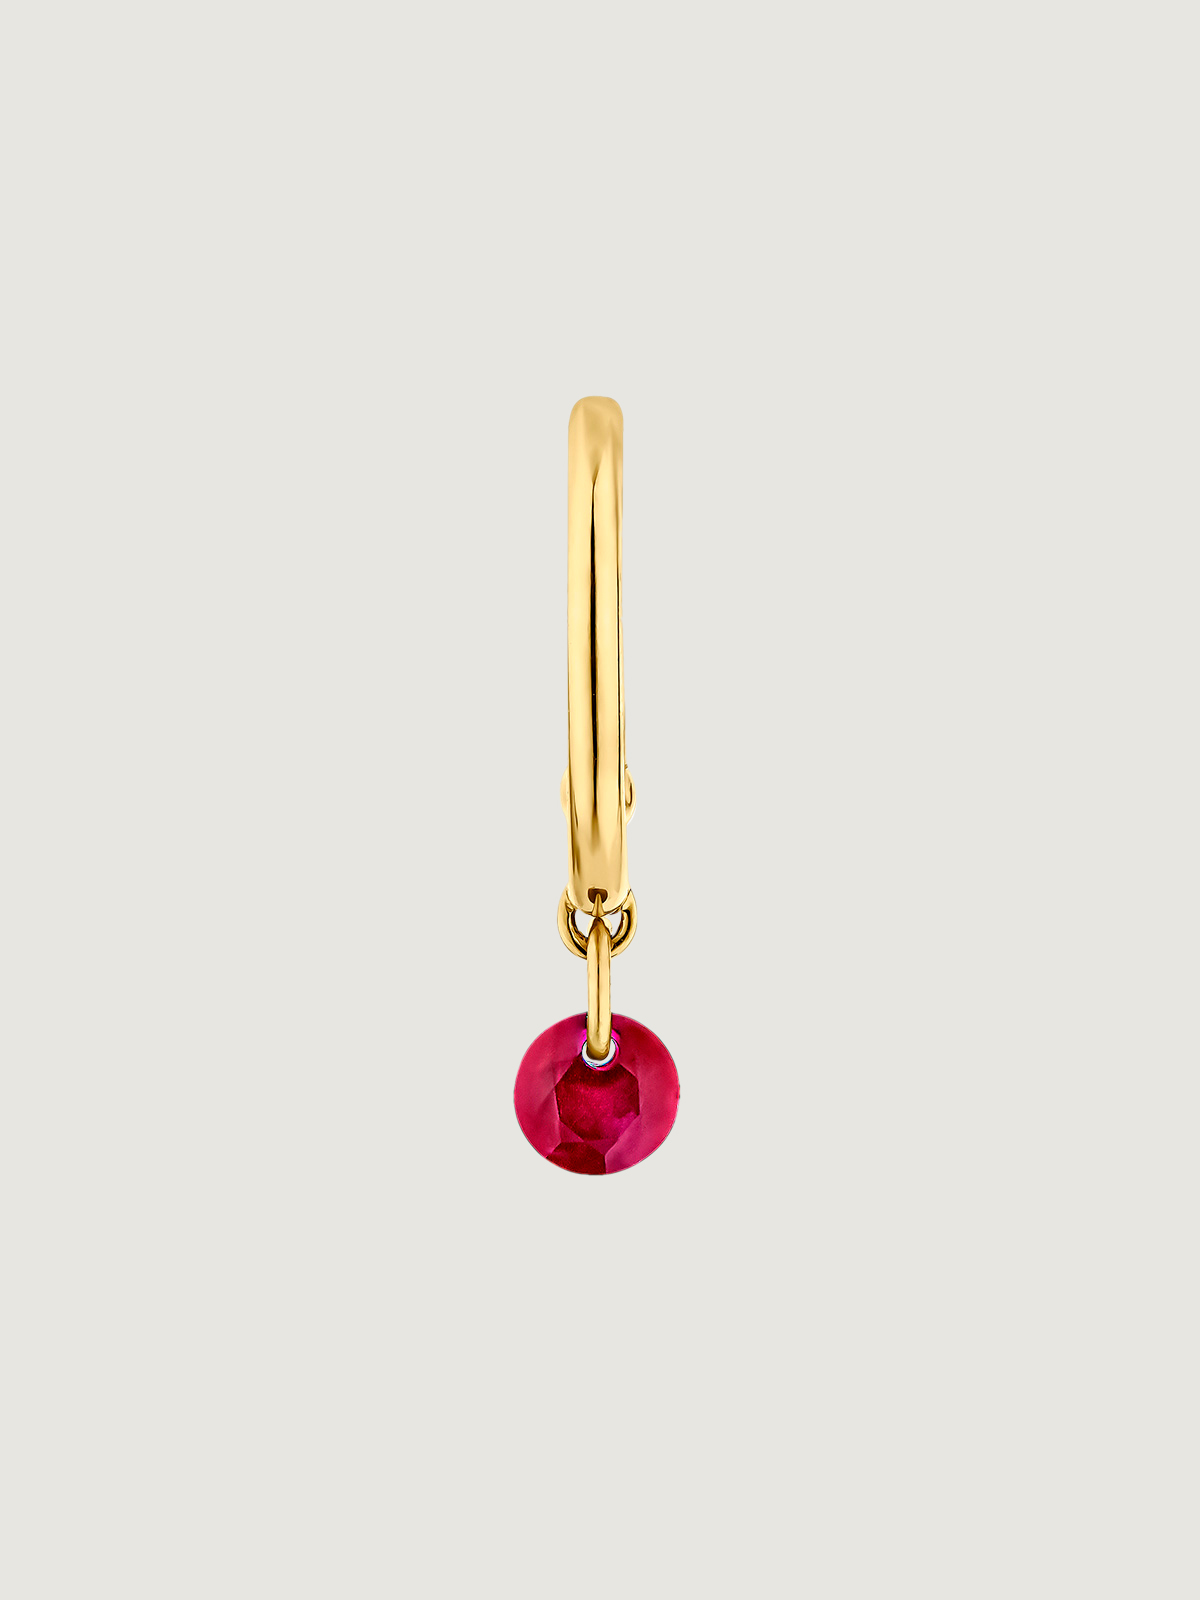 Individual 9K yellow gold hoop earring with ruby.